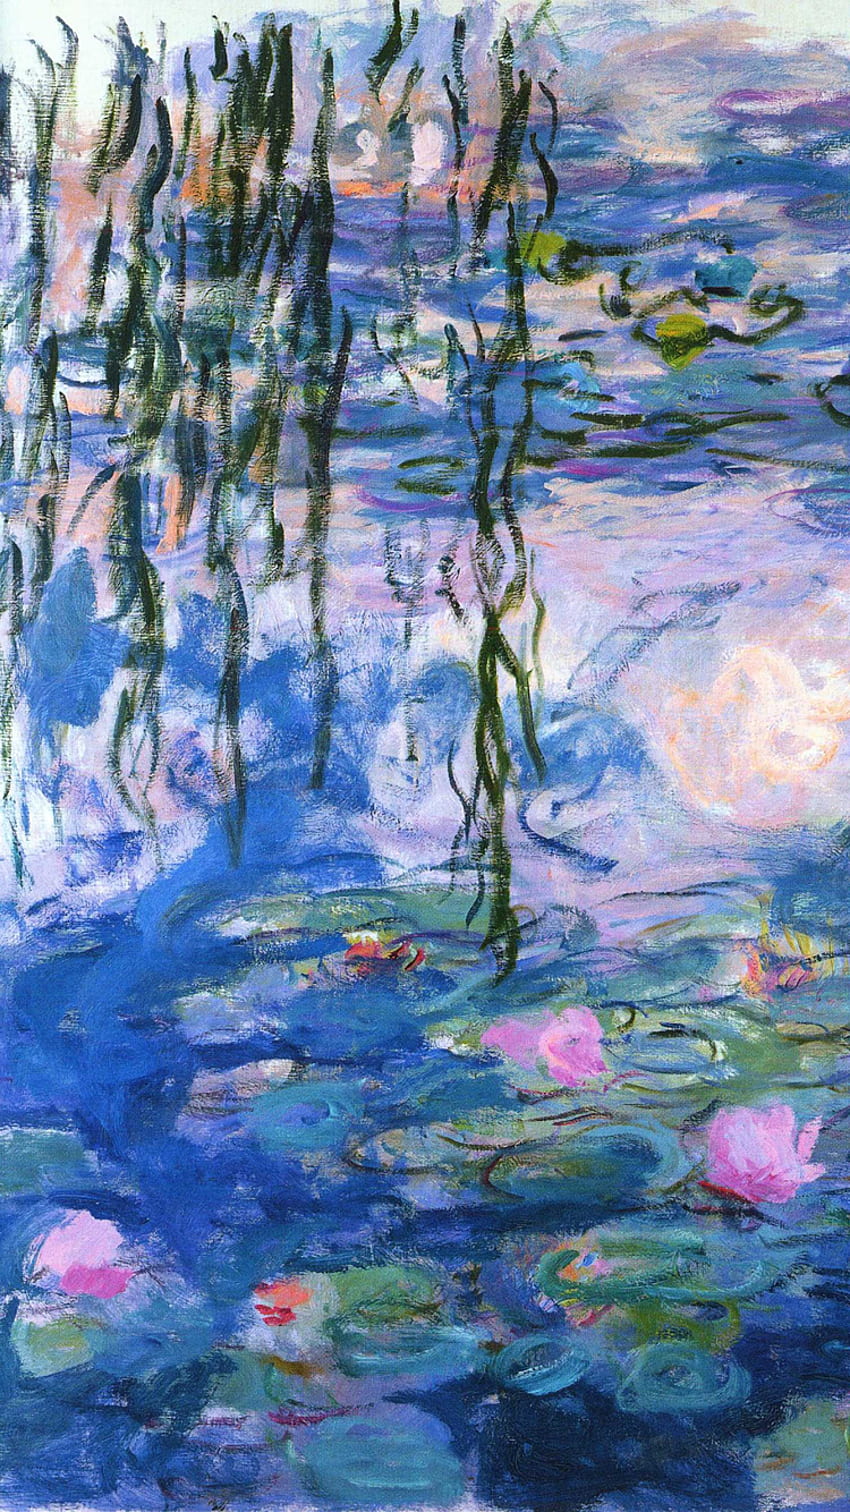 Claude Monet Iphone Wallpaper Images  Free Photos PNG Stickers Wallpapers   Backgrounds  rawpixel